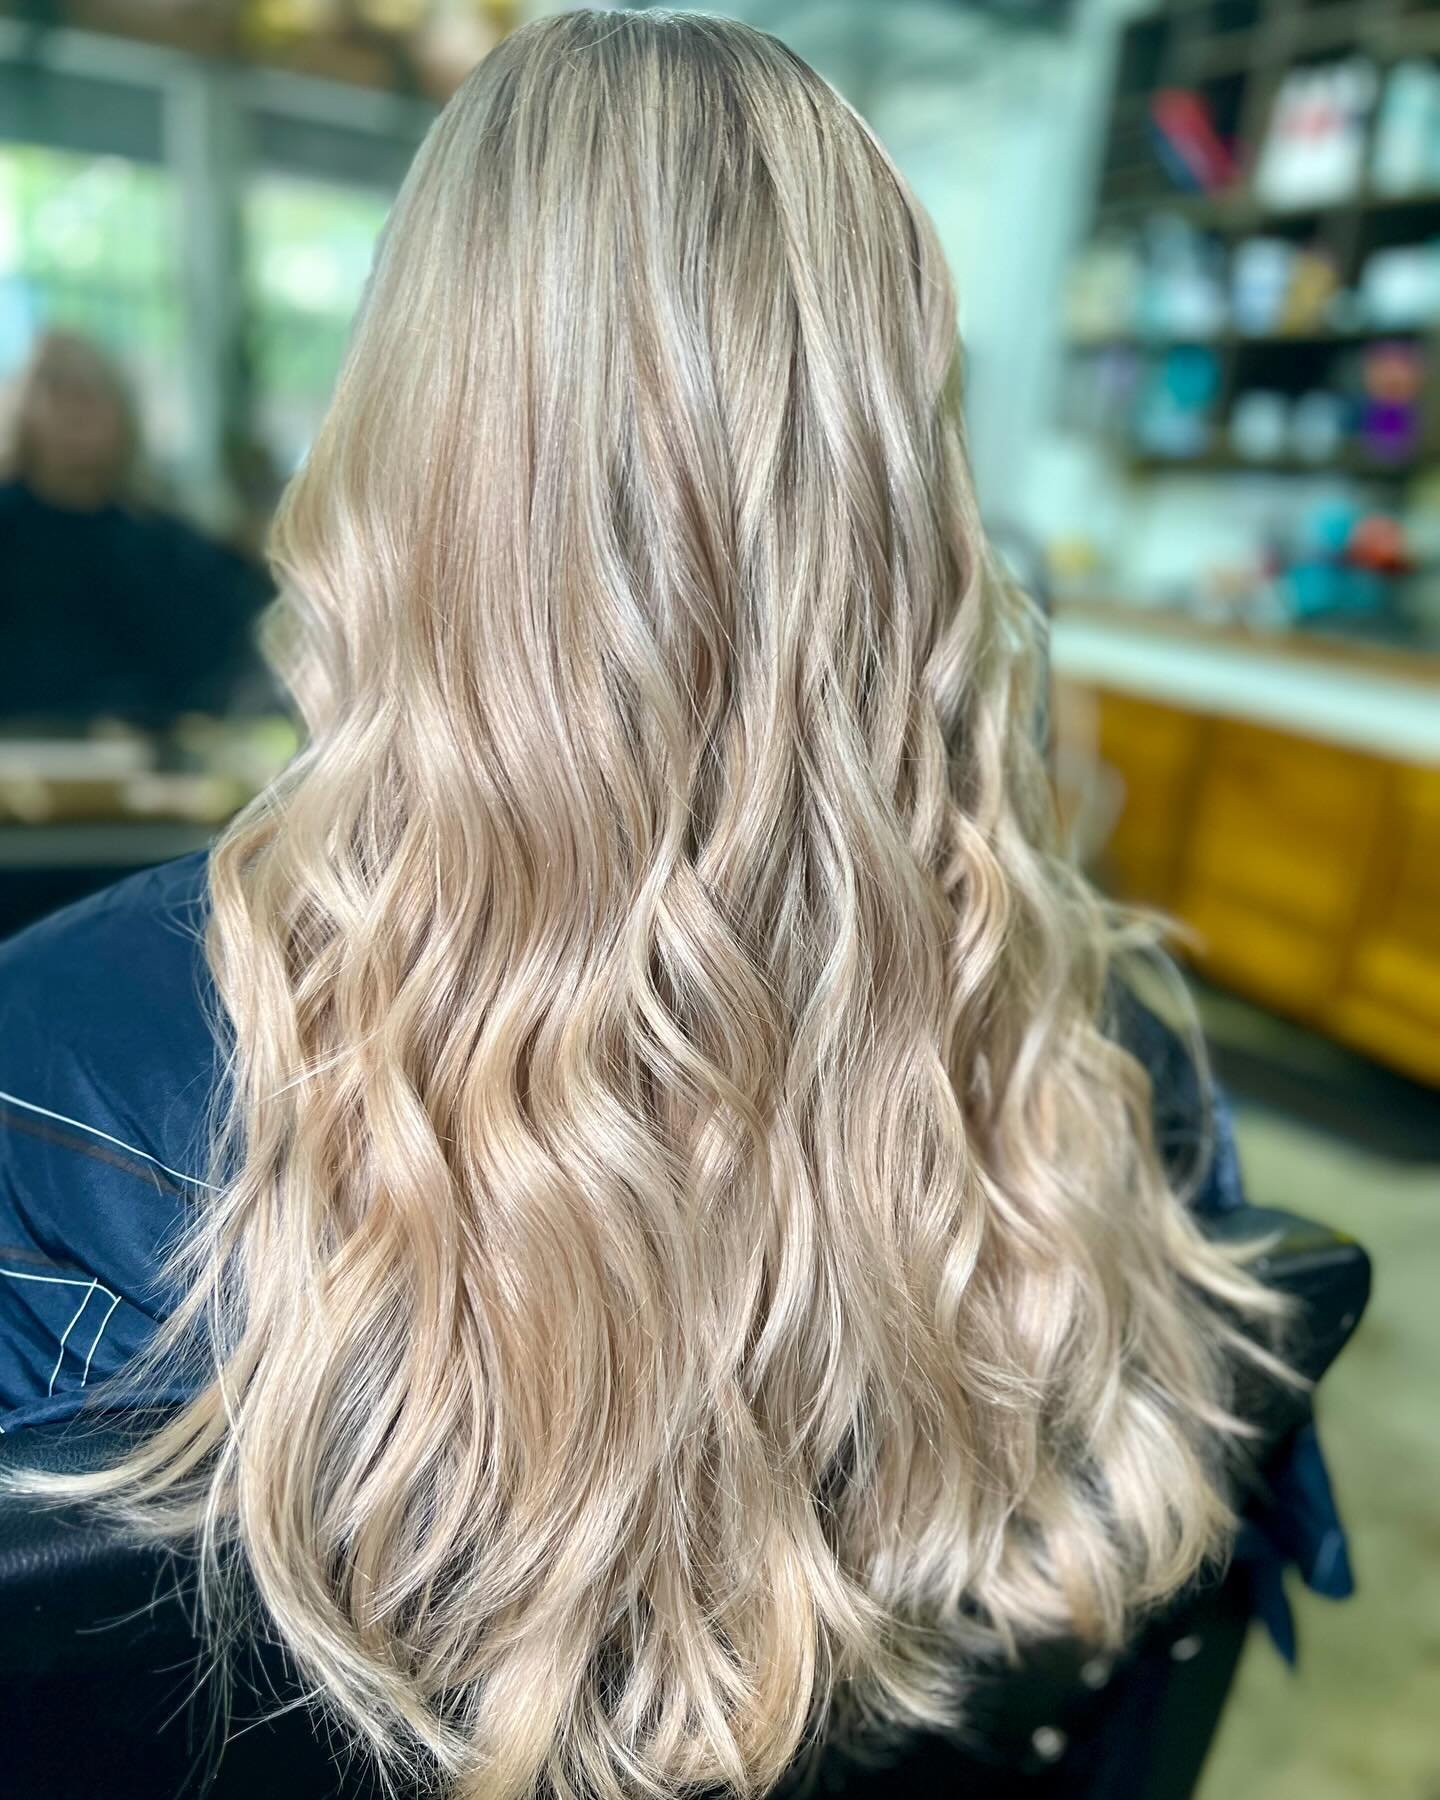 Beautiful blonde by Elissa! 
Elissa specializes in Blondes and lived in color. Check out her IG for more of her work. @the_curls_of_life